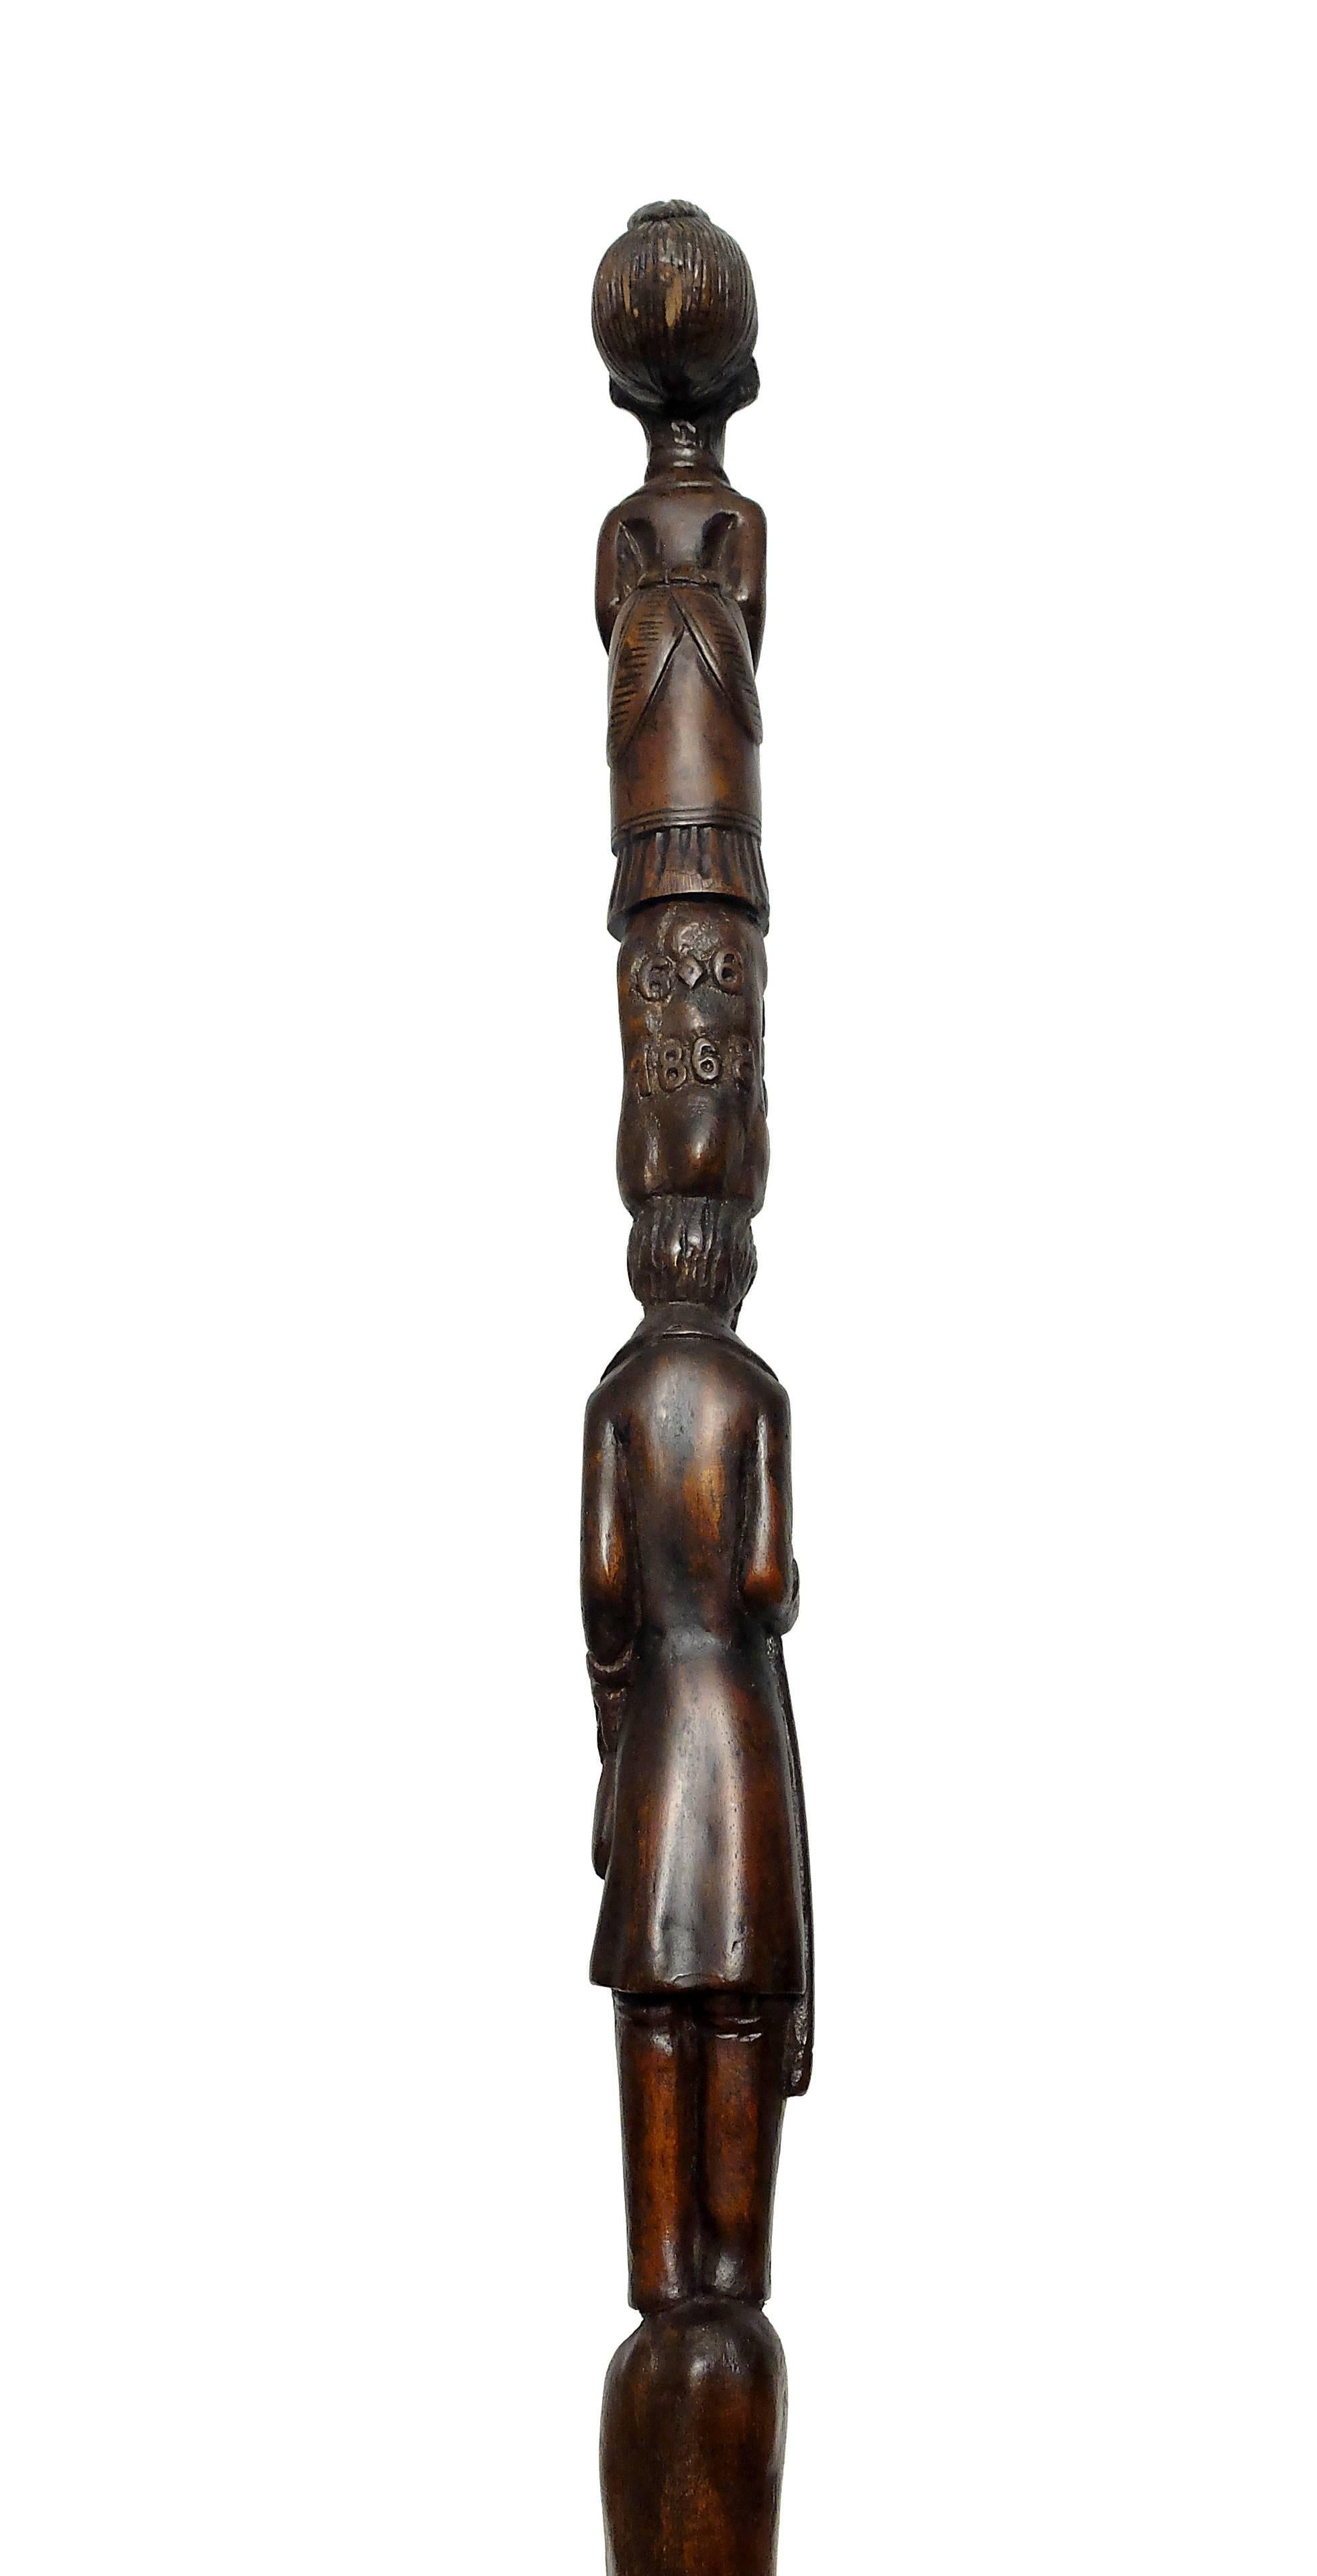 Mid-19th Century Rare Folk Art Walking Cane Related to a Marriage, England, 1868